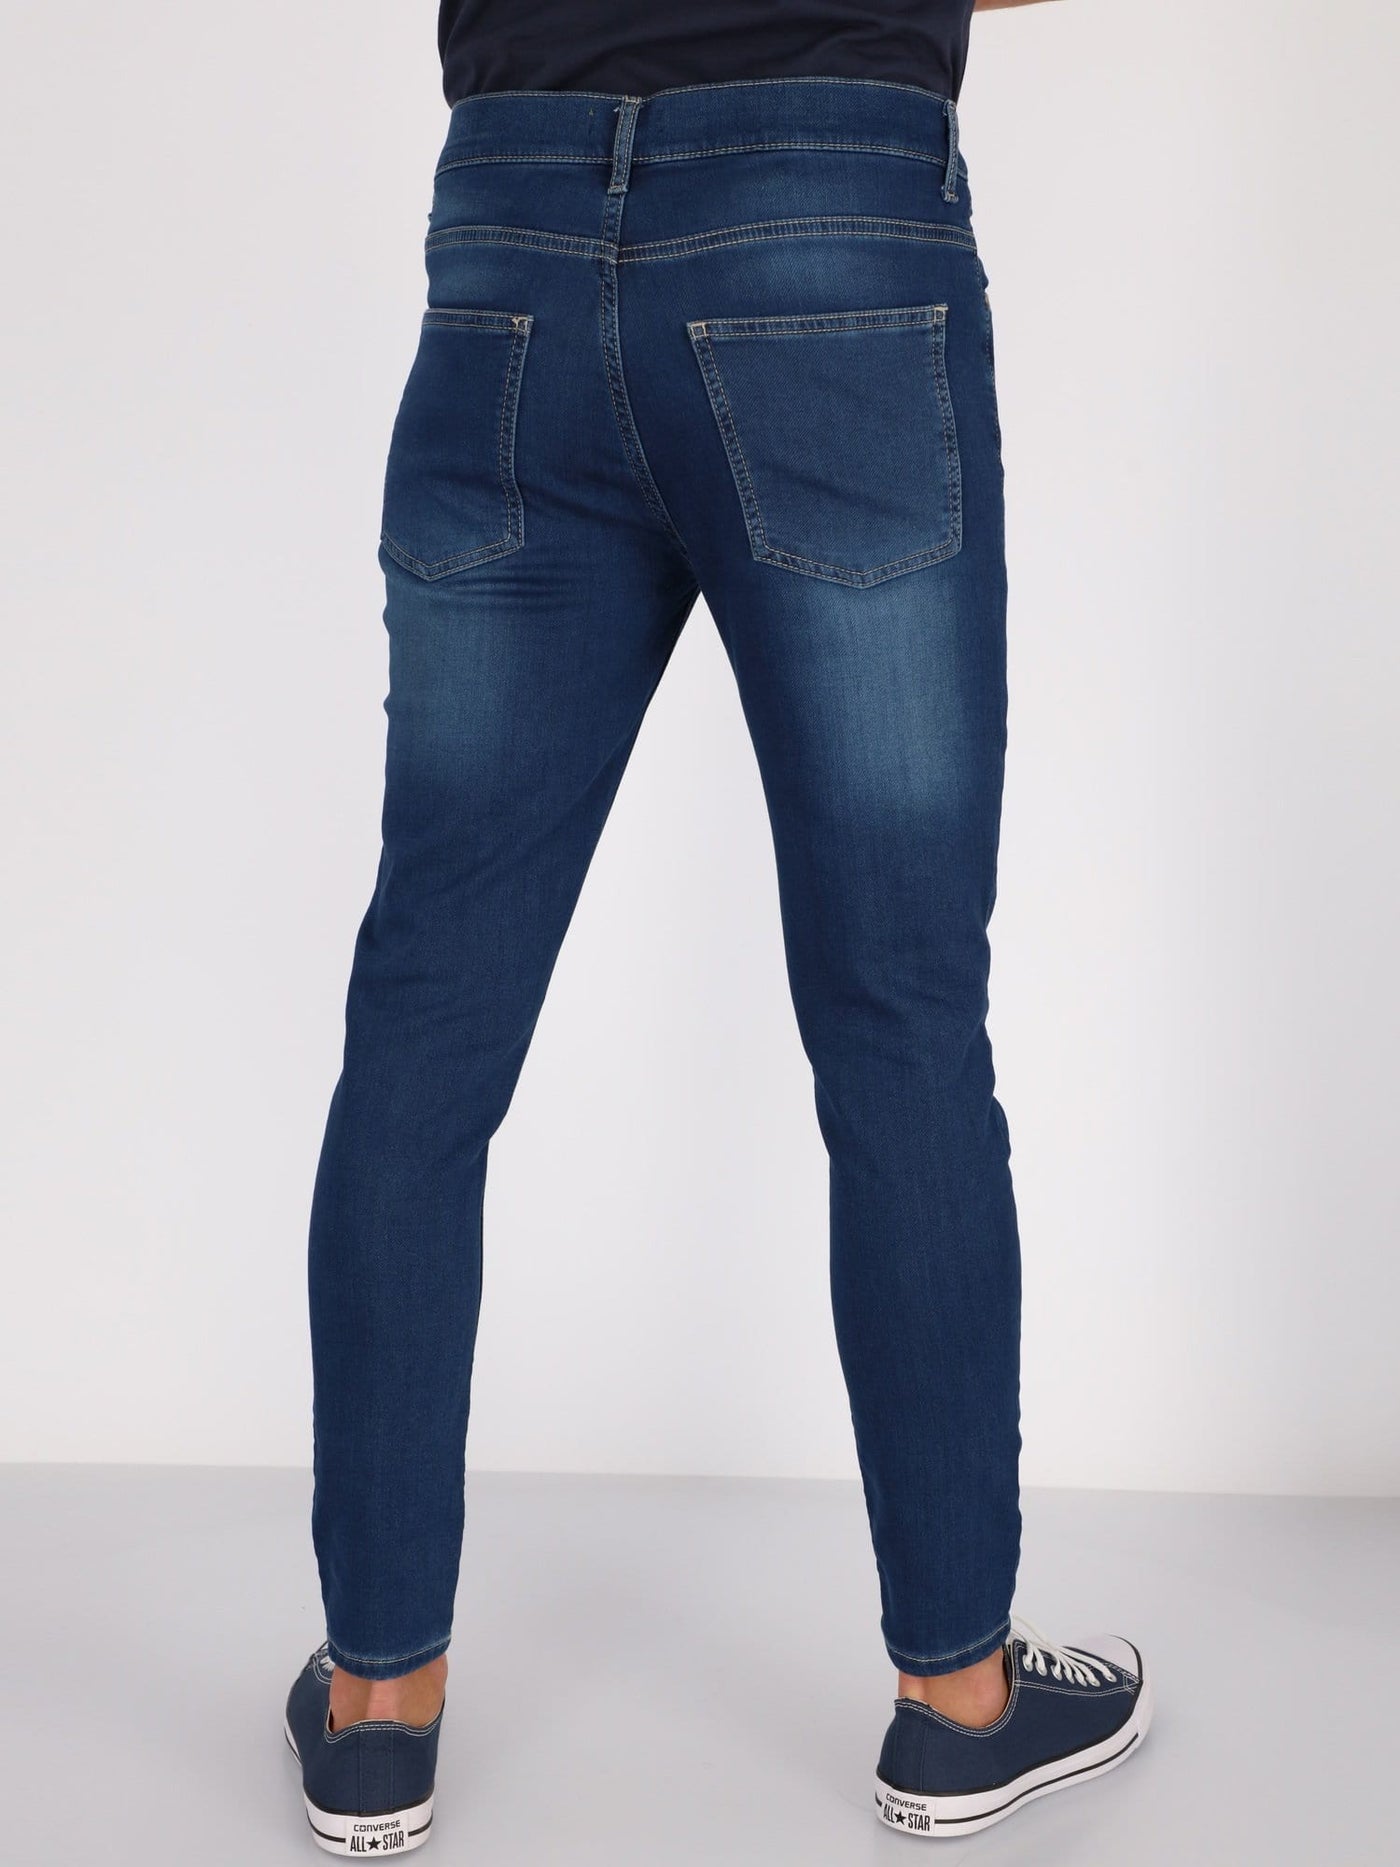 OR Pants & Shorts Slim Fit Mid-Rise Jeans